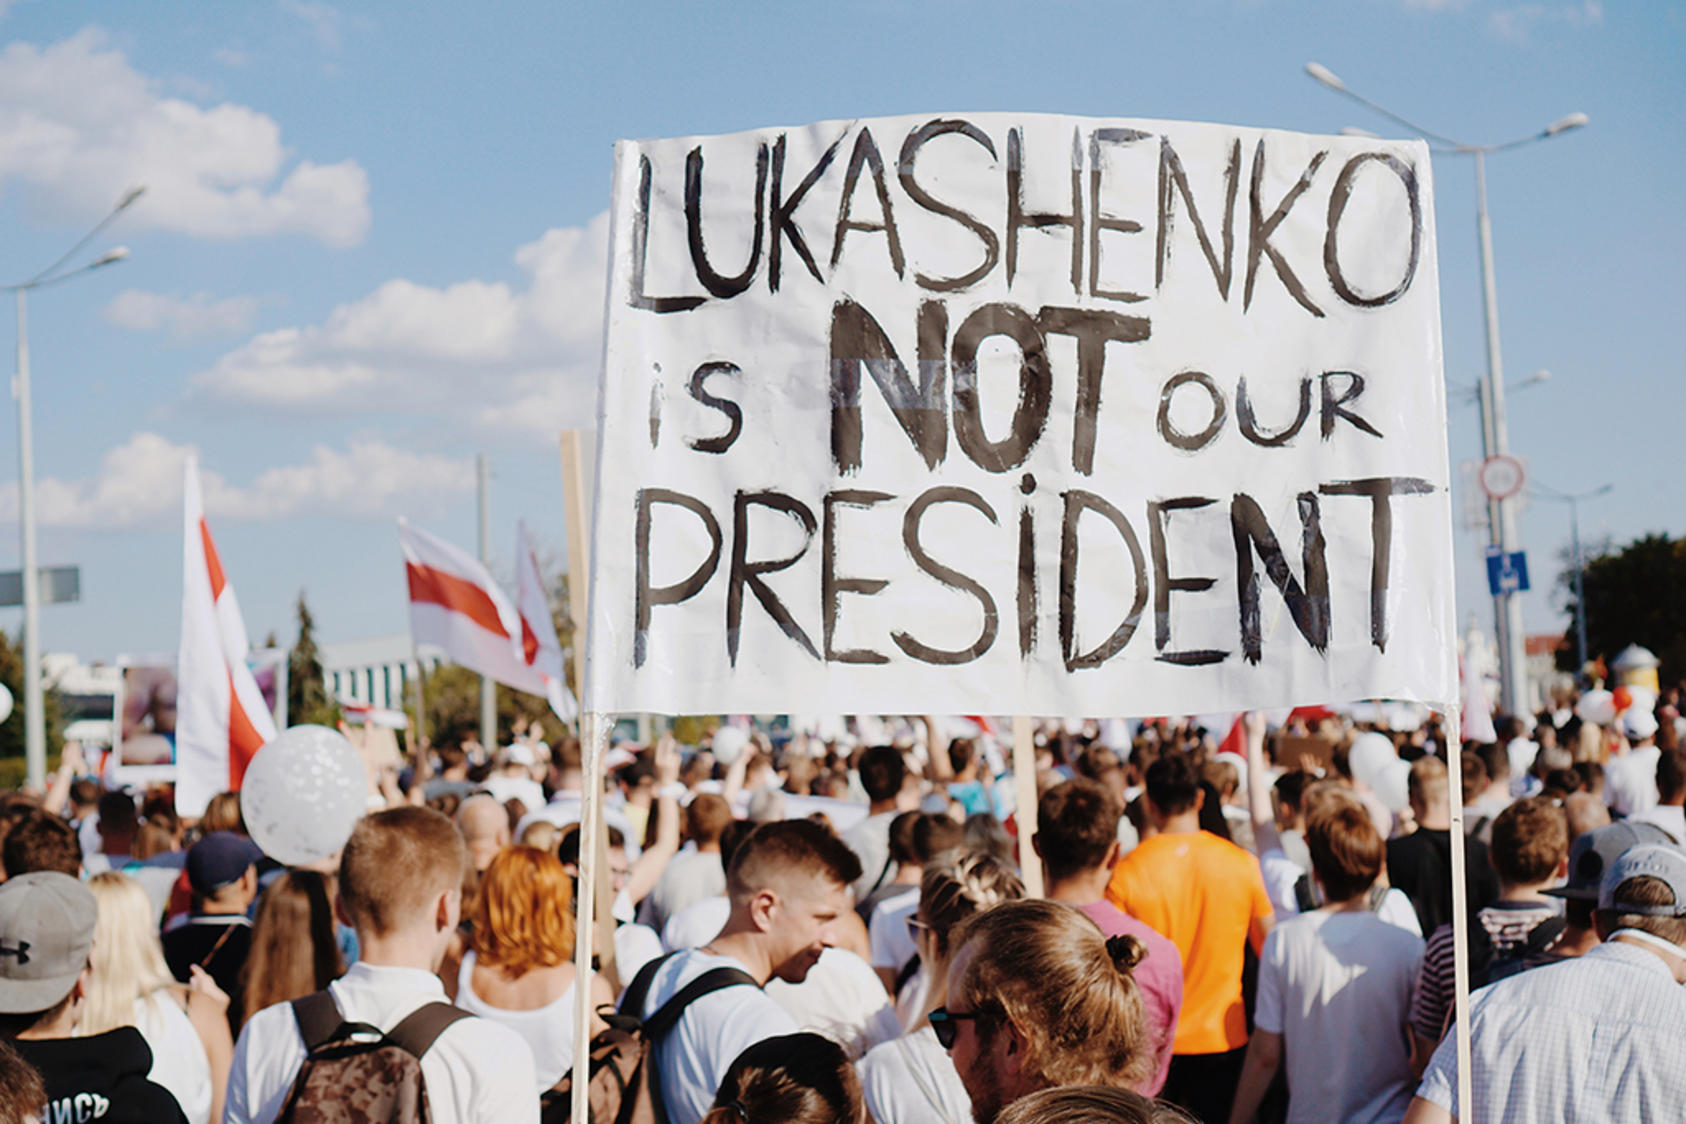 Protesters in Minsk, Belarus, gathered to demonstrate in support of the removal of Lukashenko from the office of President after claims that his government conducted vote-rigging during the 2020 presidential election.